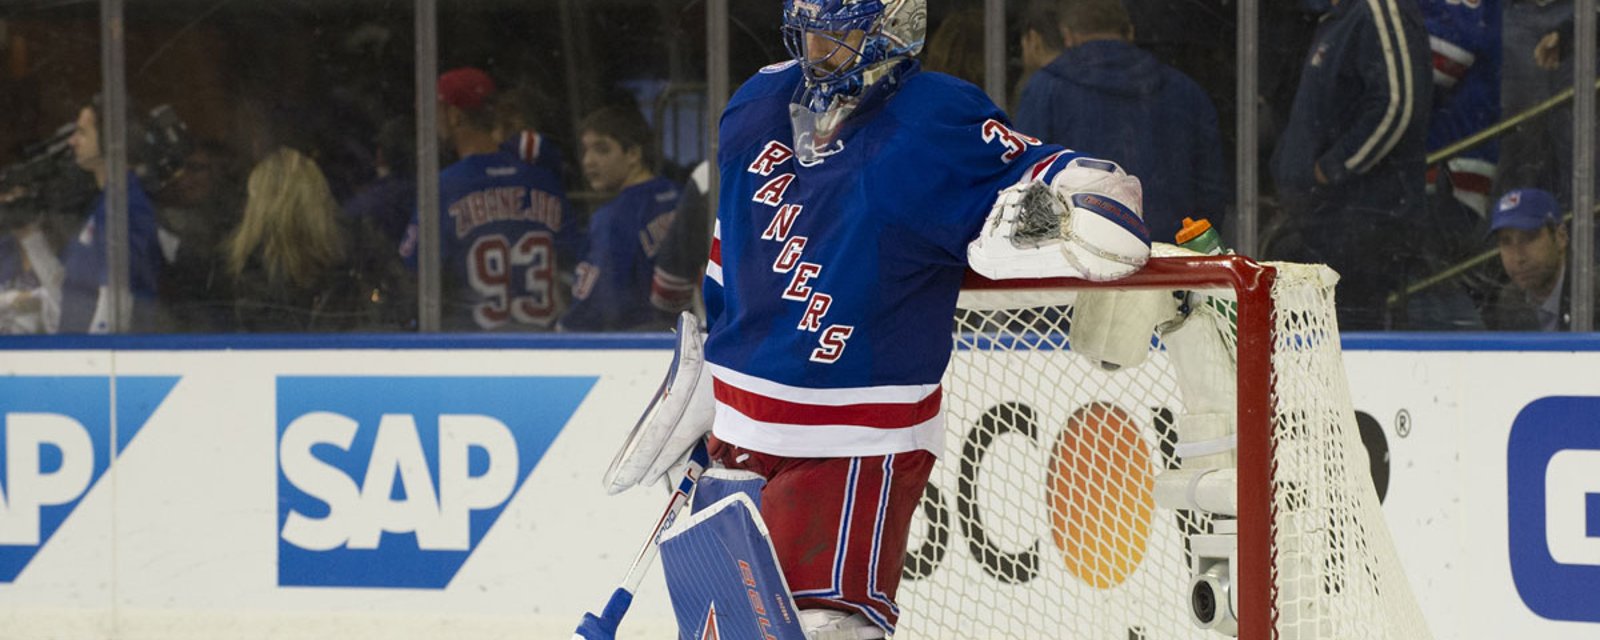 The Rangers “aren't ready, aren't checked in” says NHL Network 